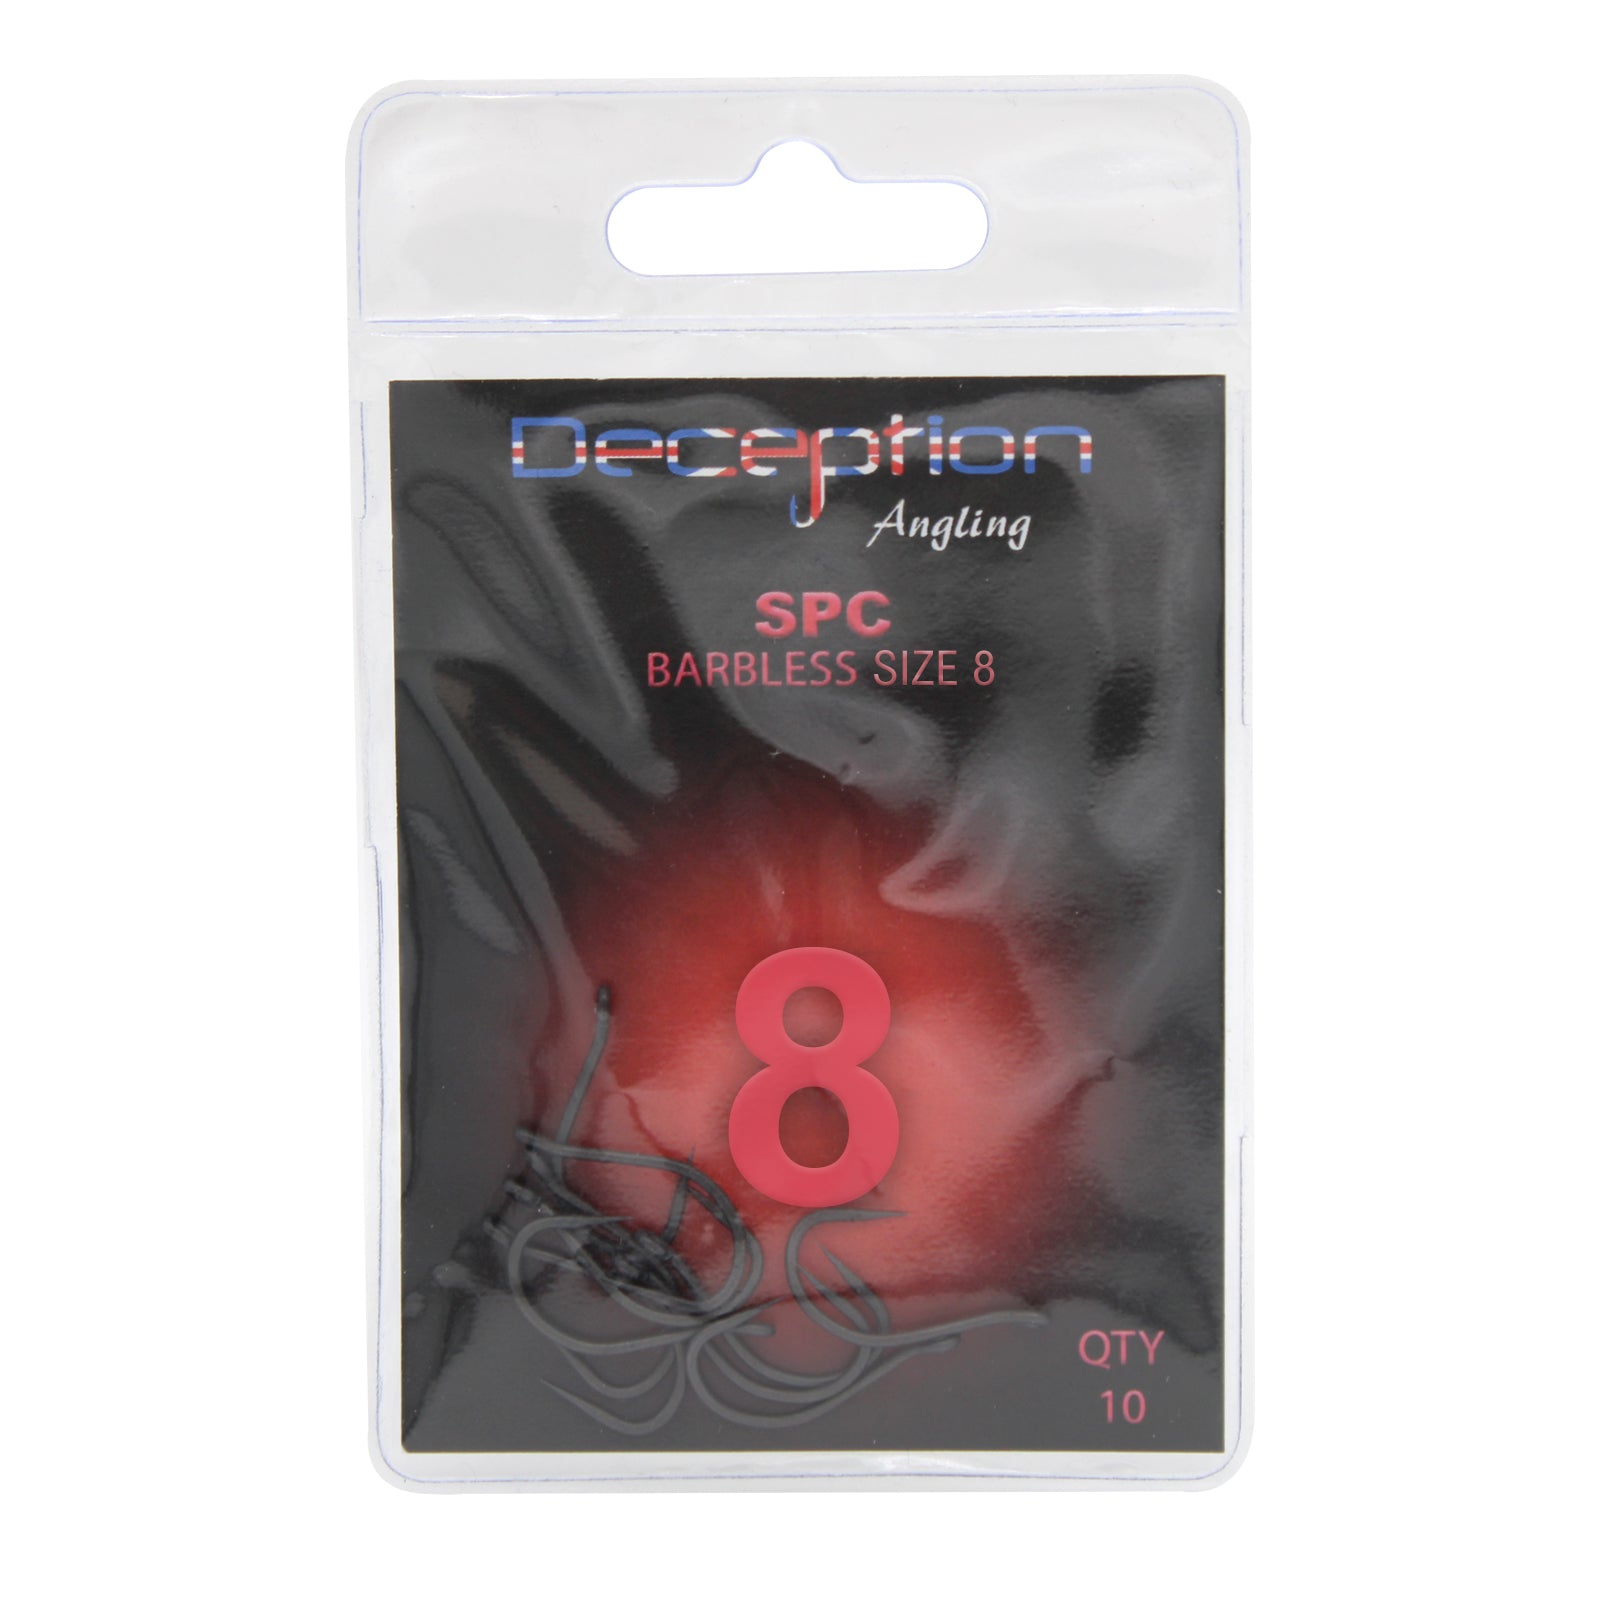 Deception Angling SPC Barbless Pack of 10 Fishing Hooks Size 8